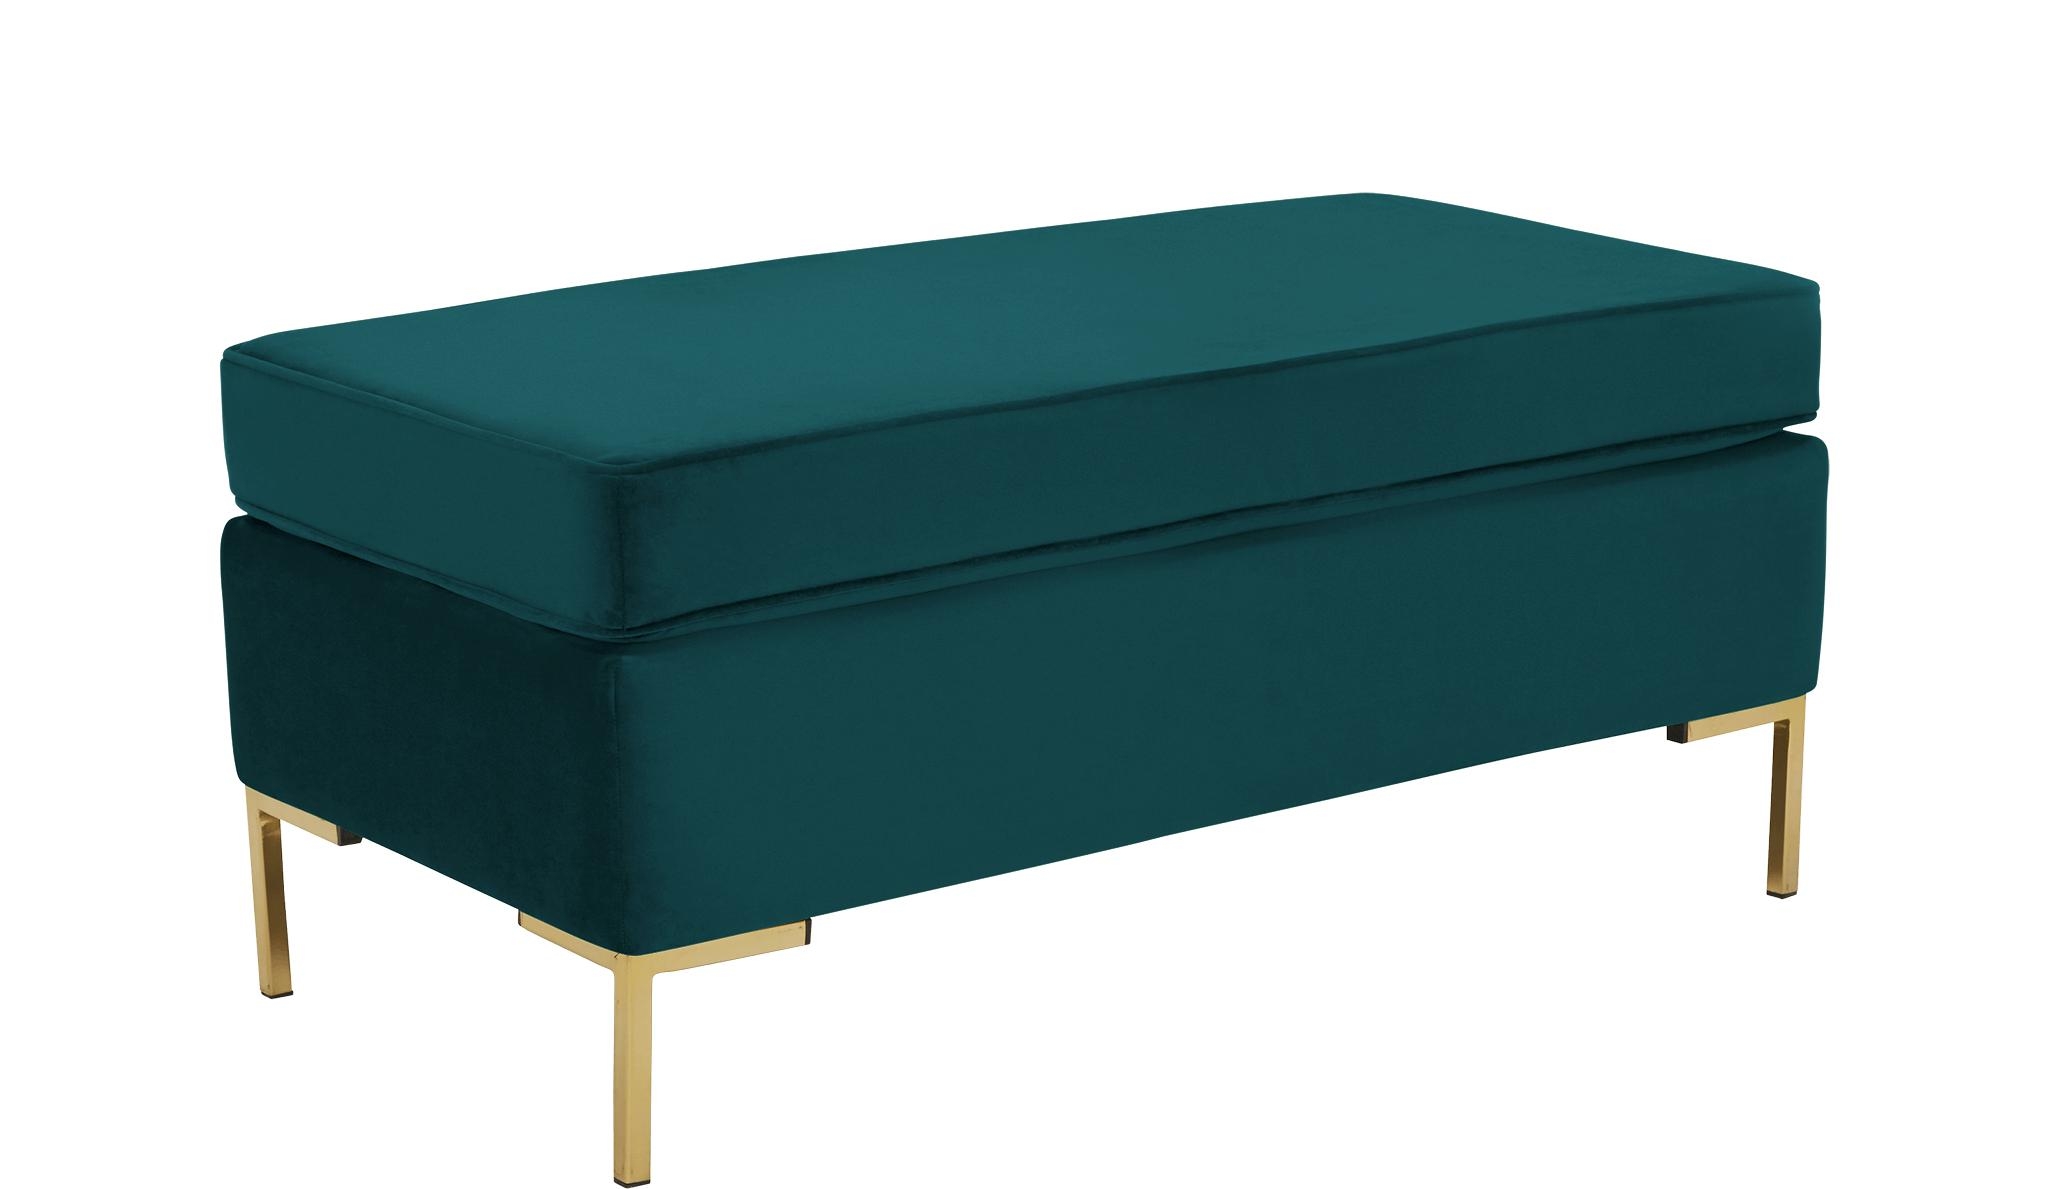 Blue Dee Mid Century Modern Bench with Storage - Royale Peacock - Image 1